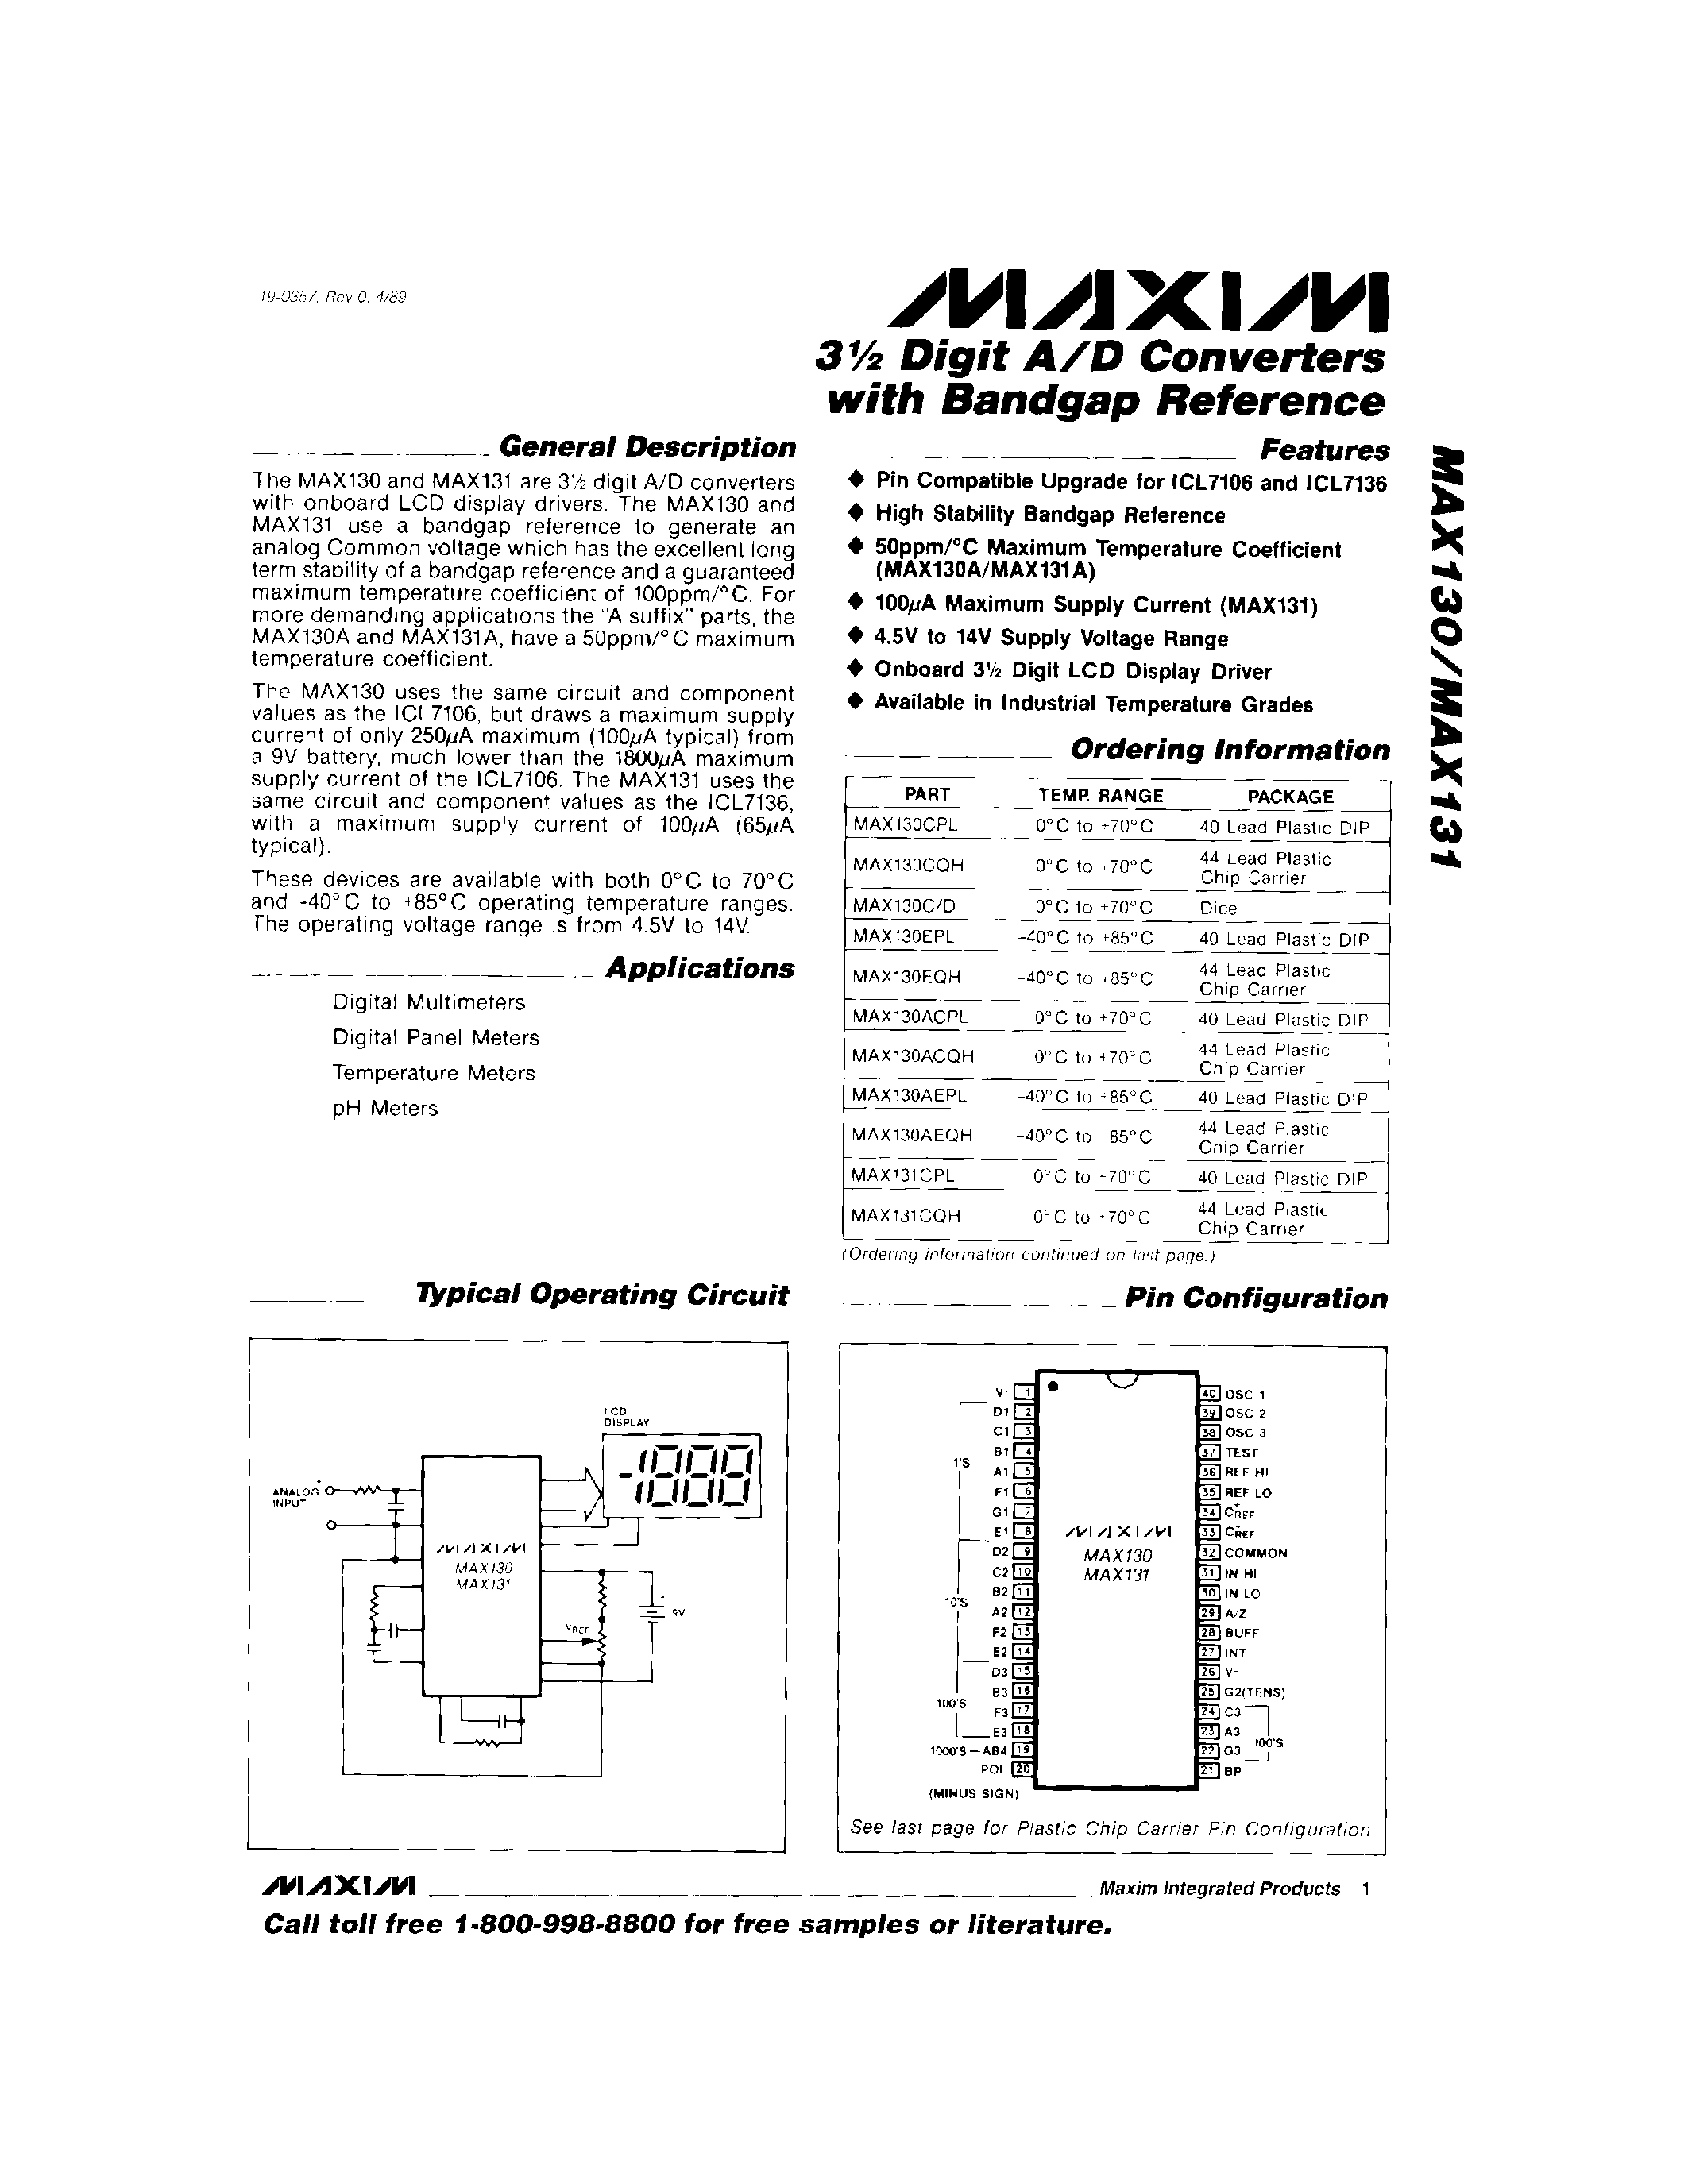 Datasheet MAX131C/D - 3 Digit A/D Converters with Bandgap Refrence page 1